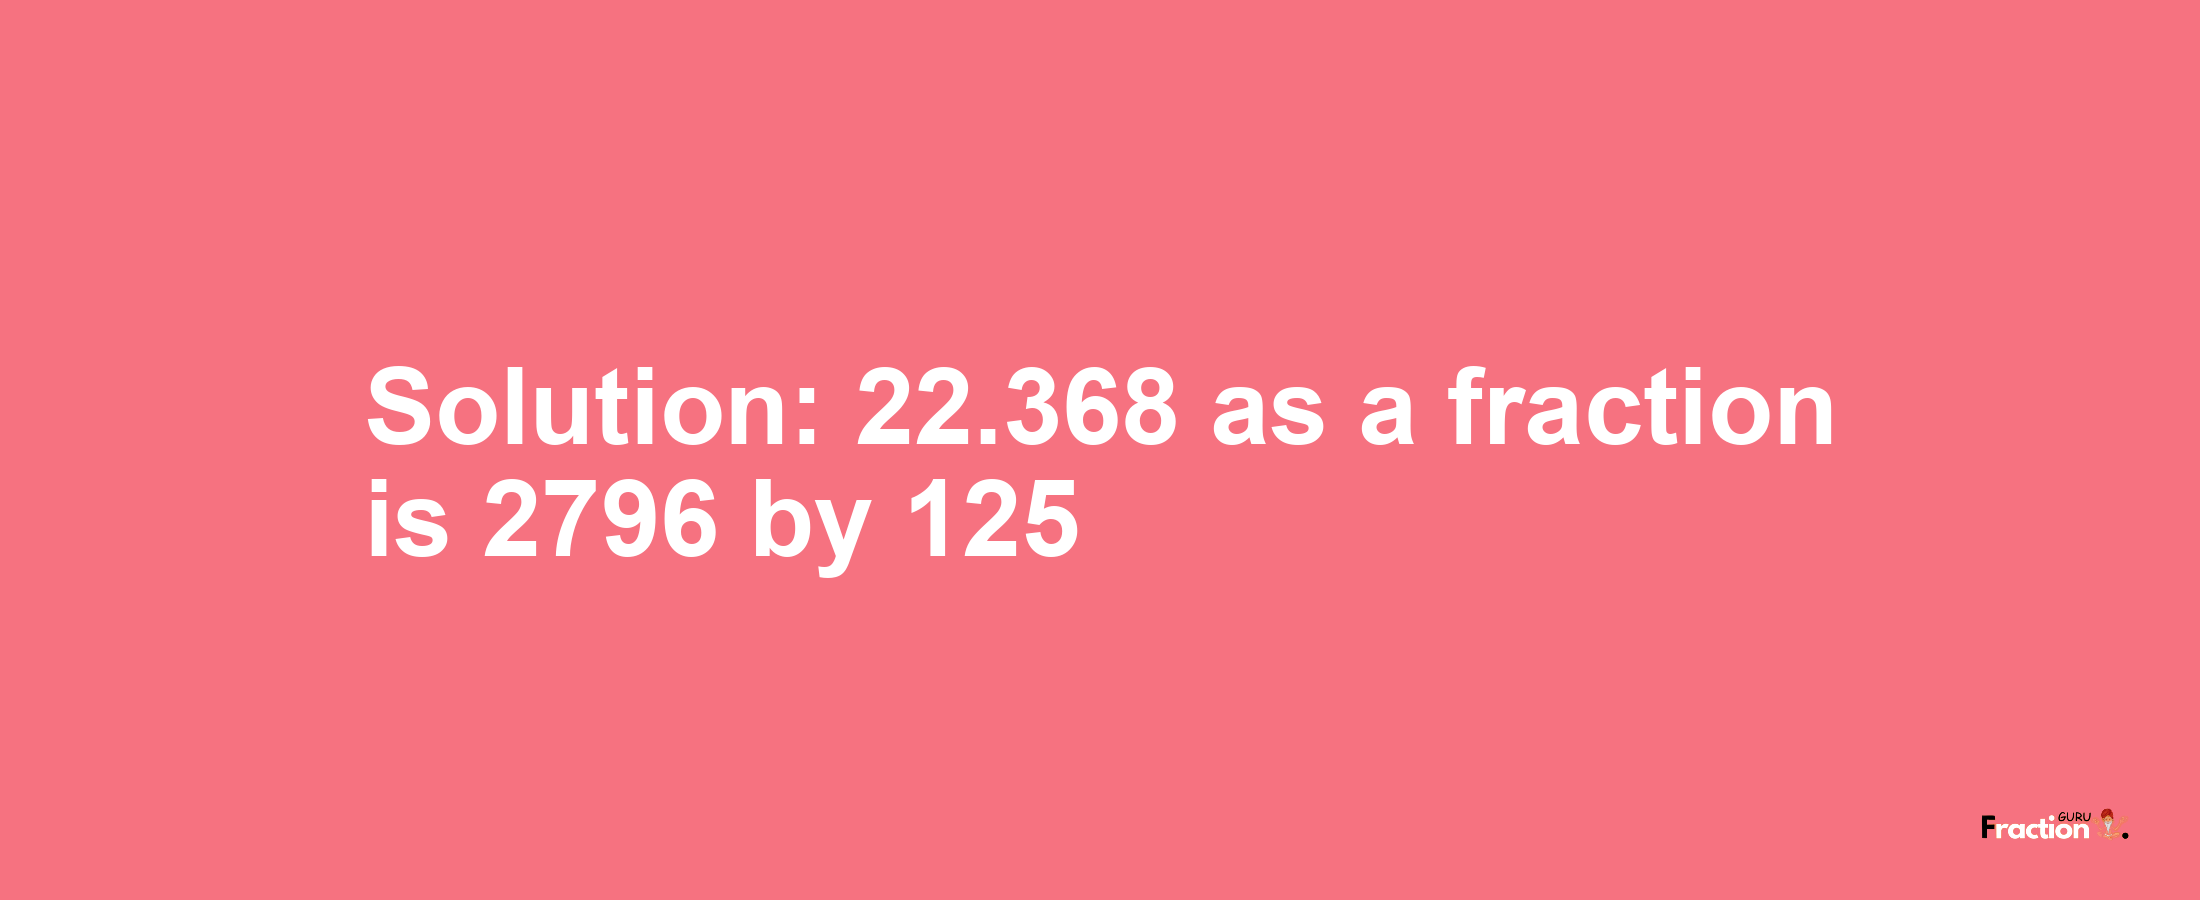 Solution:22.368 as a fraction is 2796/125